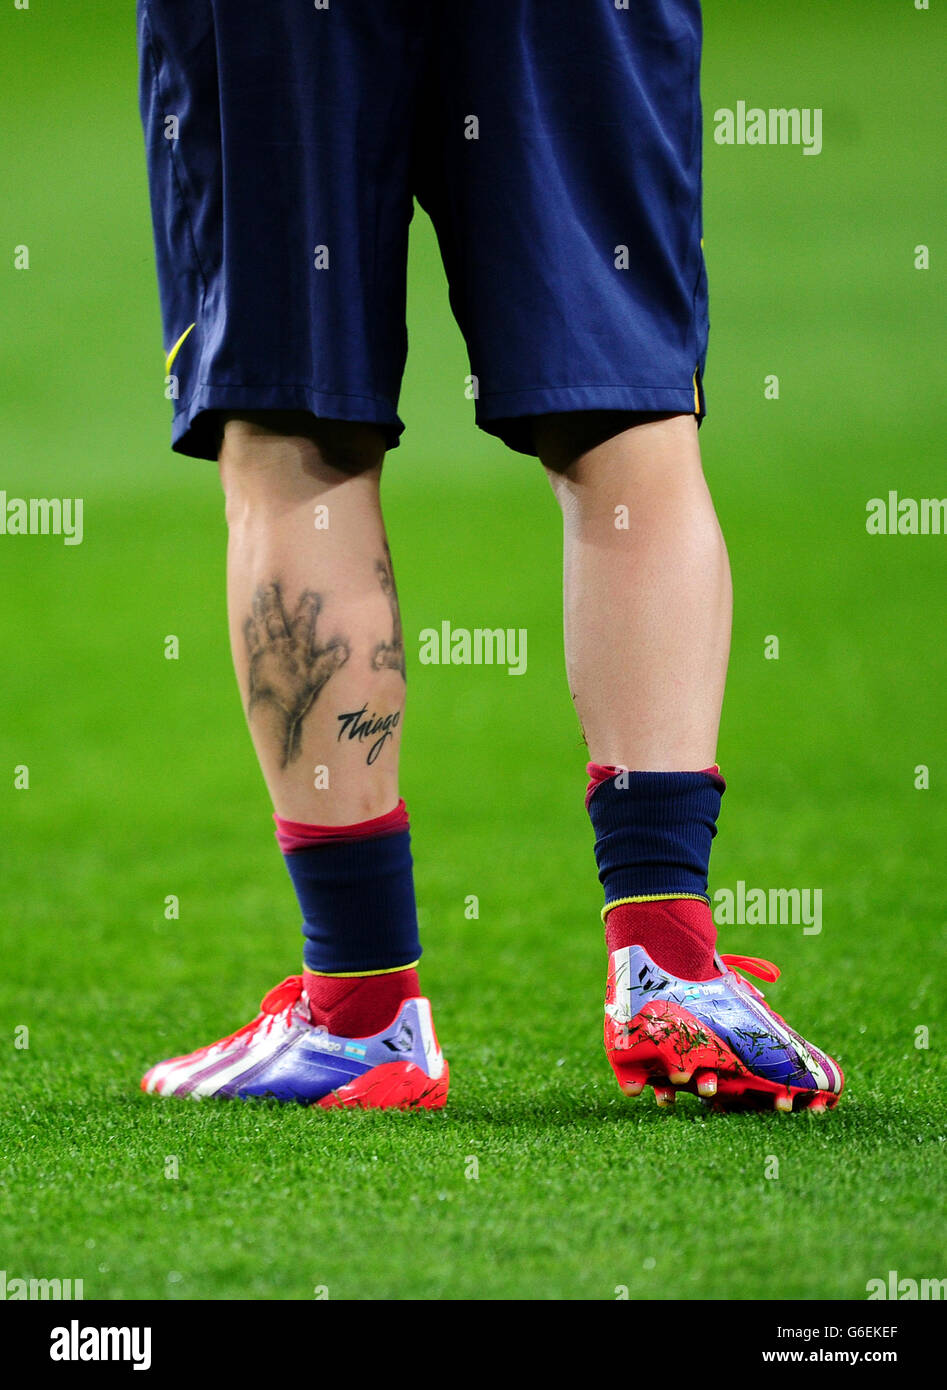 32 Best Football Tattoo Ideas and Designs For Football Lovers